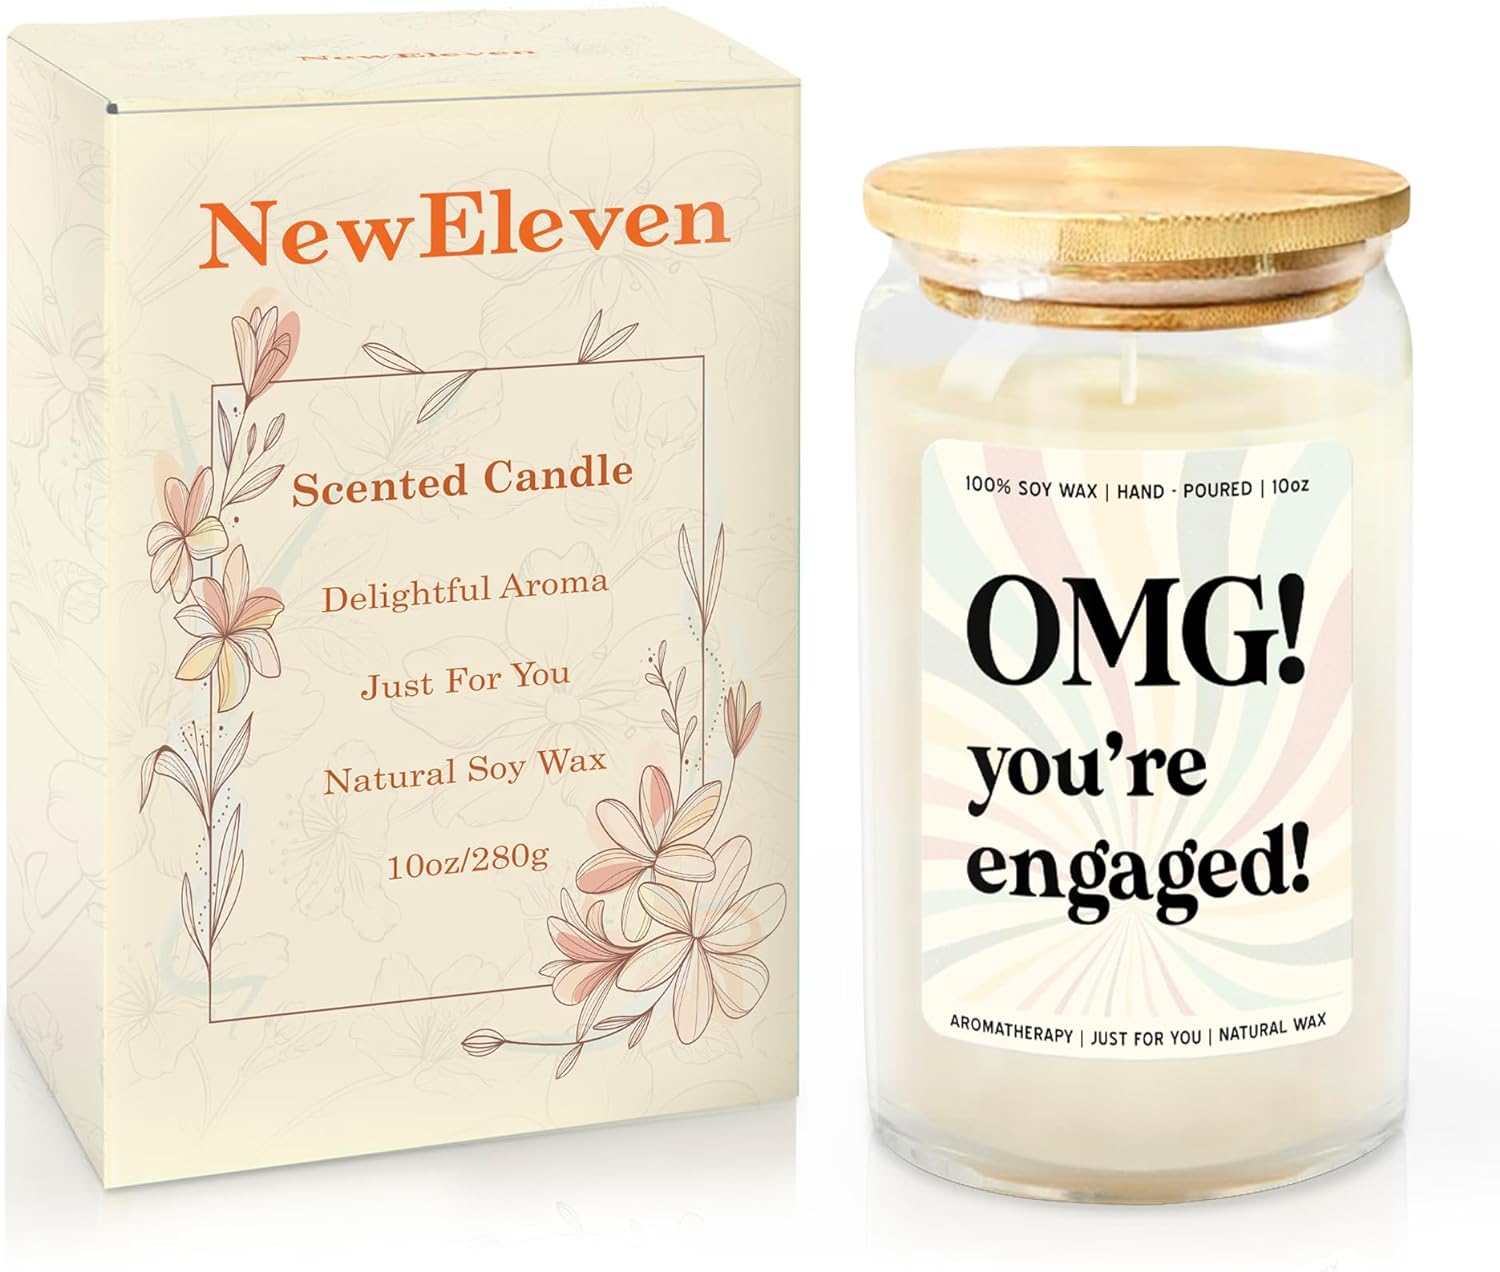 OMG! You're Engaged! - 10 Oz Candle